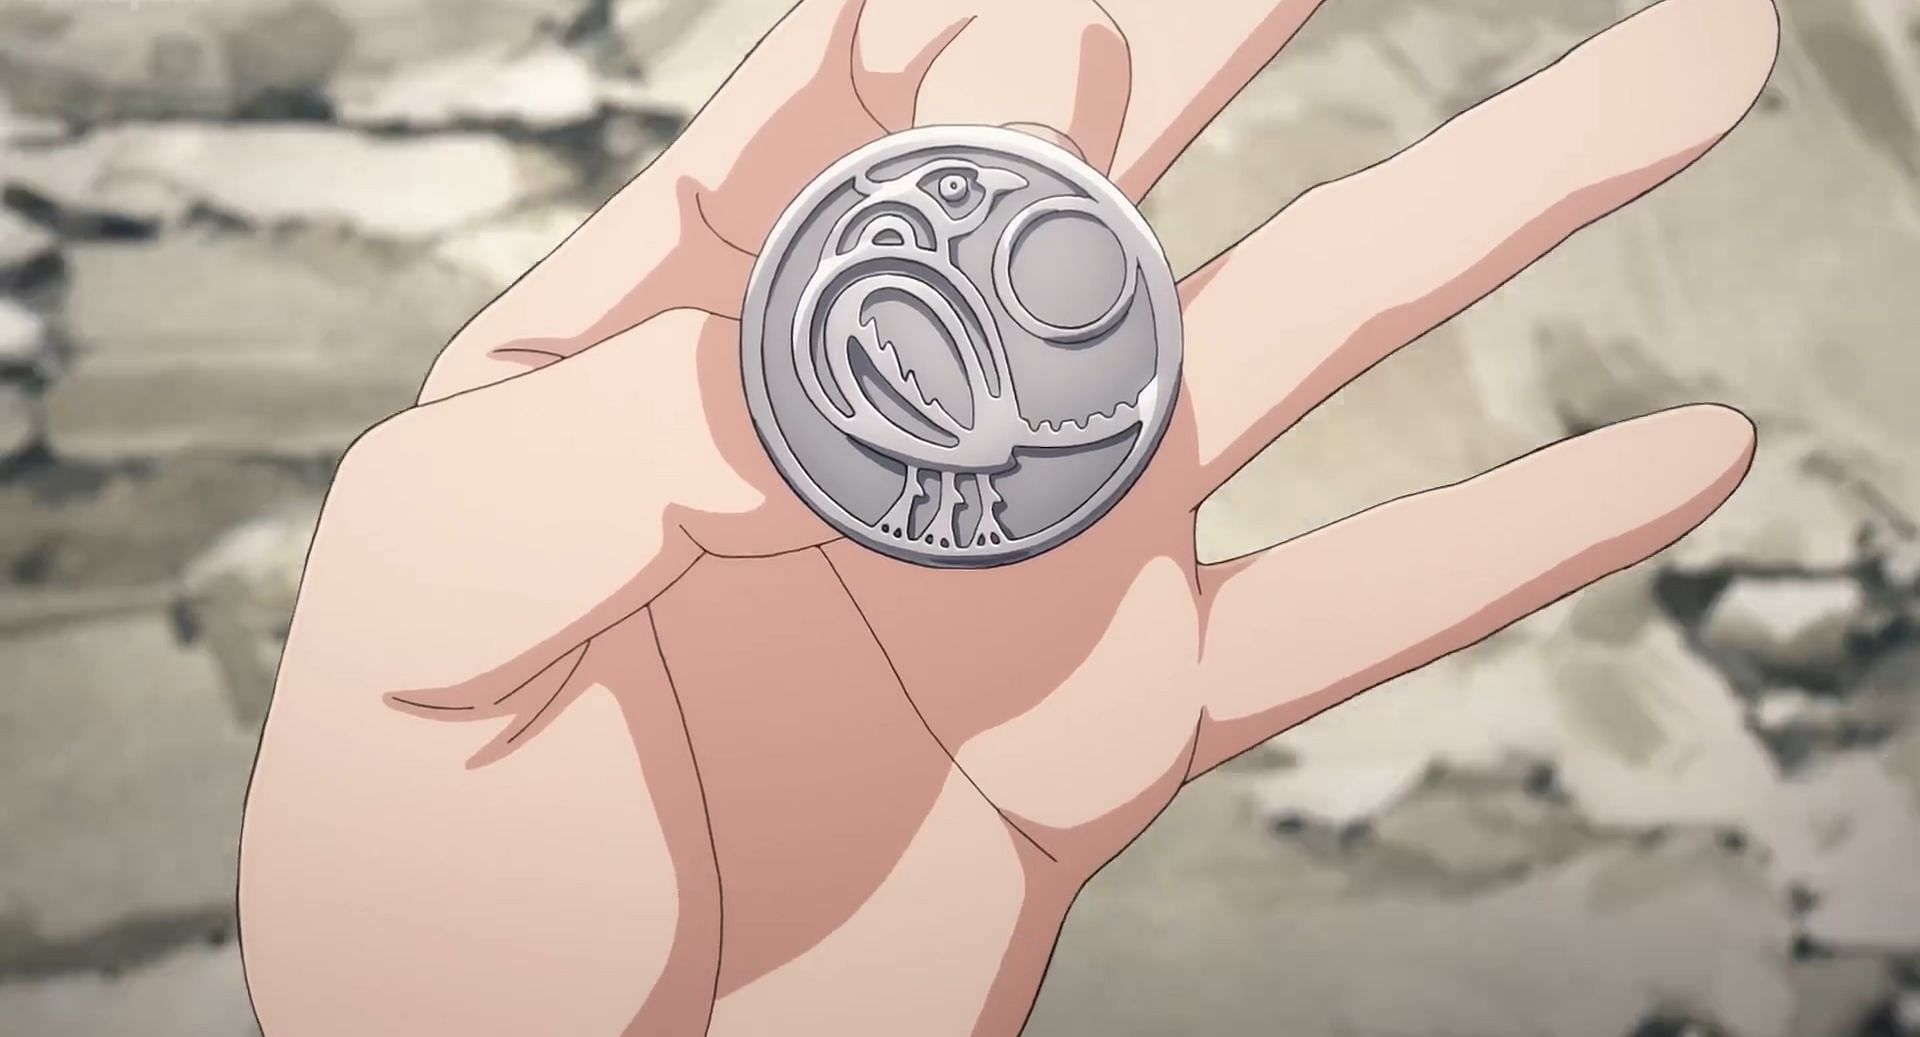 The pin that Dr. Usami had when he killed himself (Image via Production I.G.)